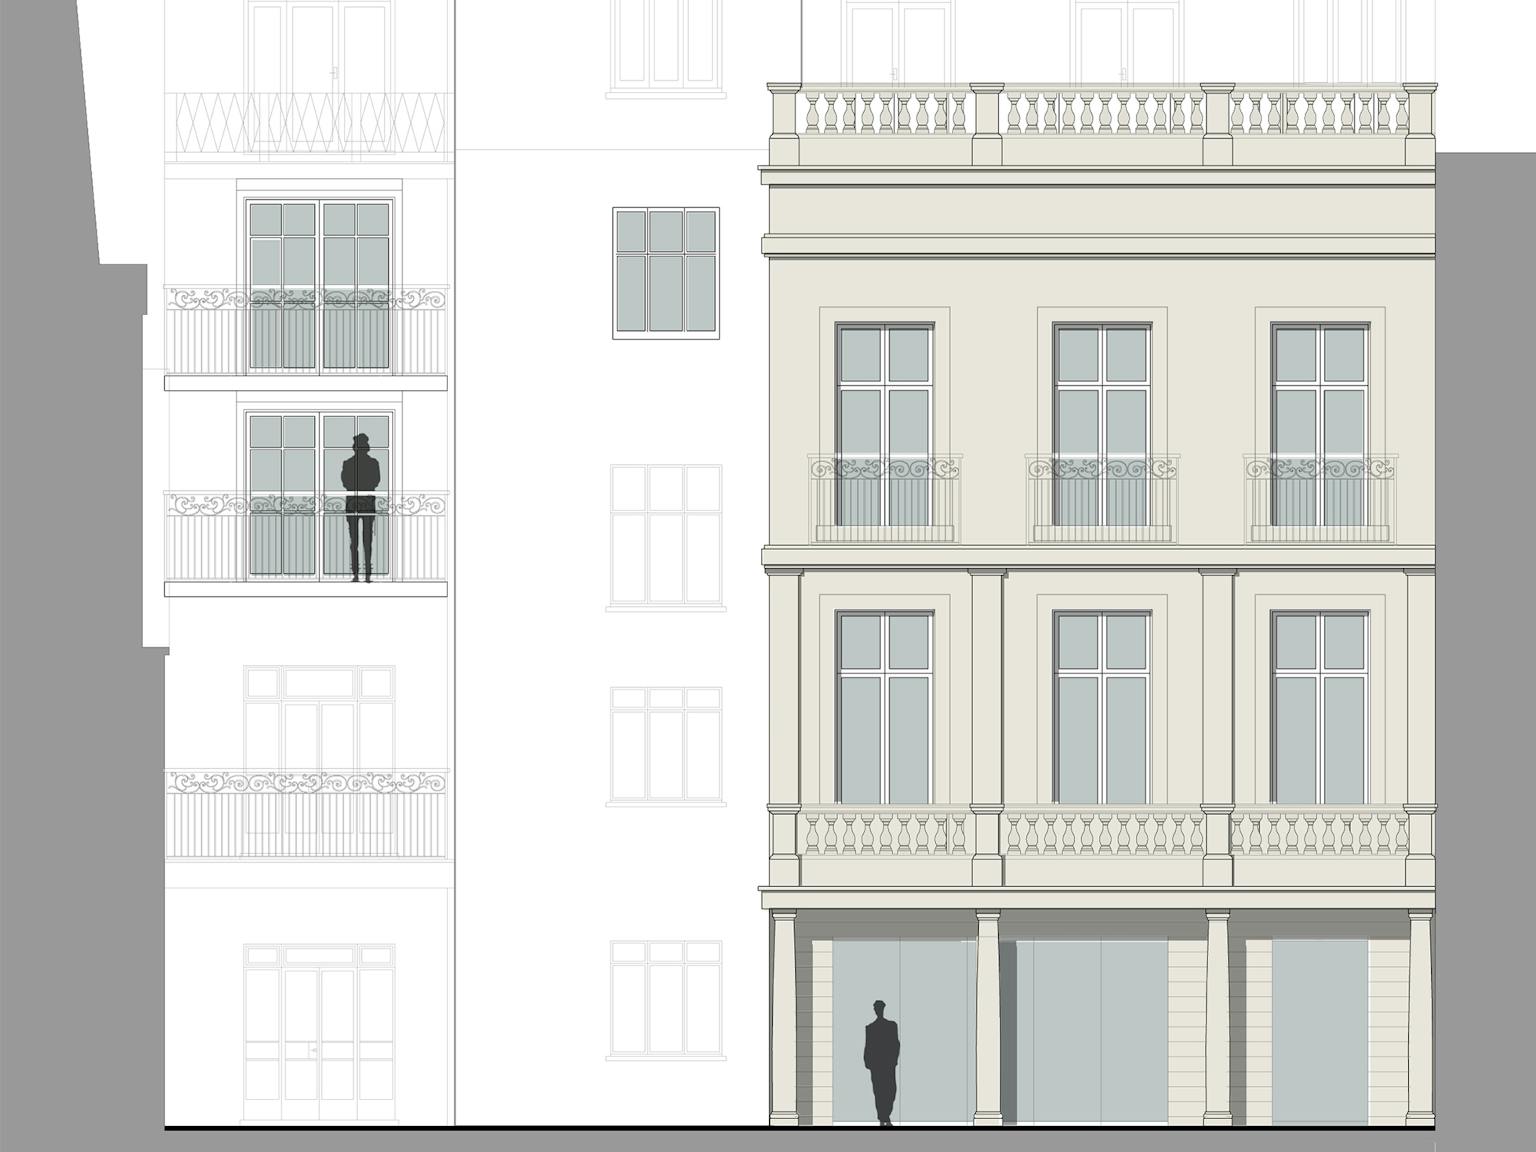 The scheme to convert the townhouses into one home received planning and listed building consent in June 2010.